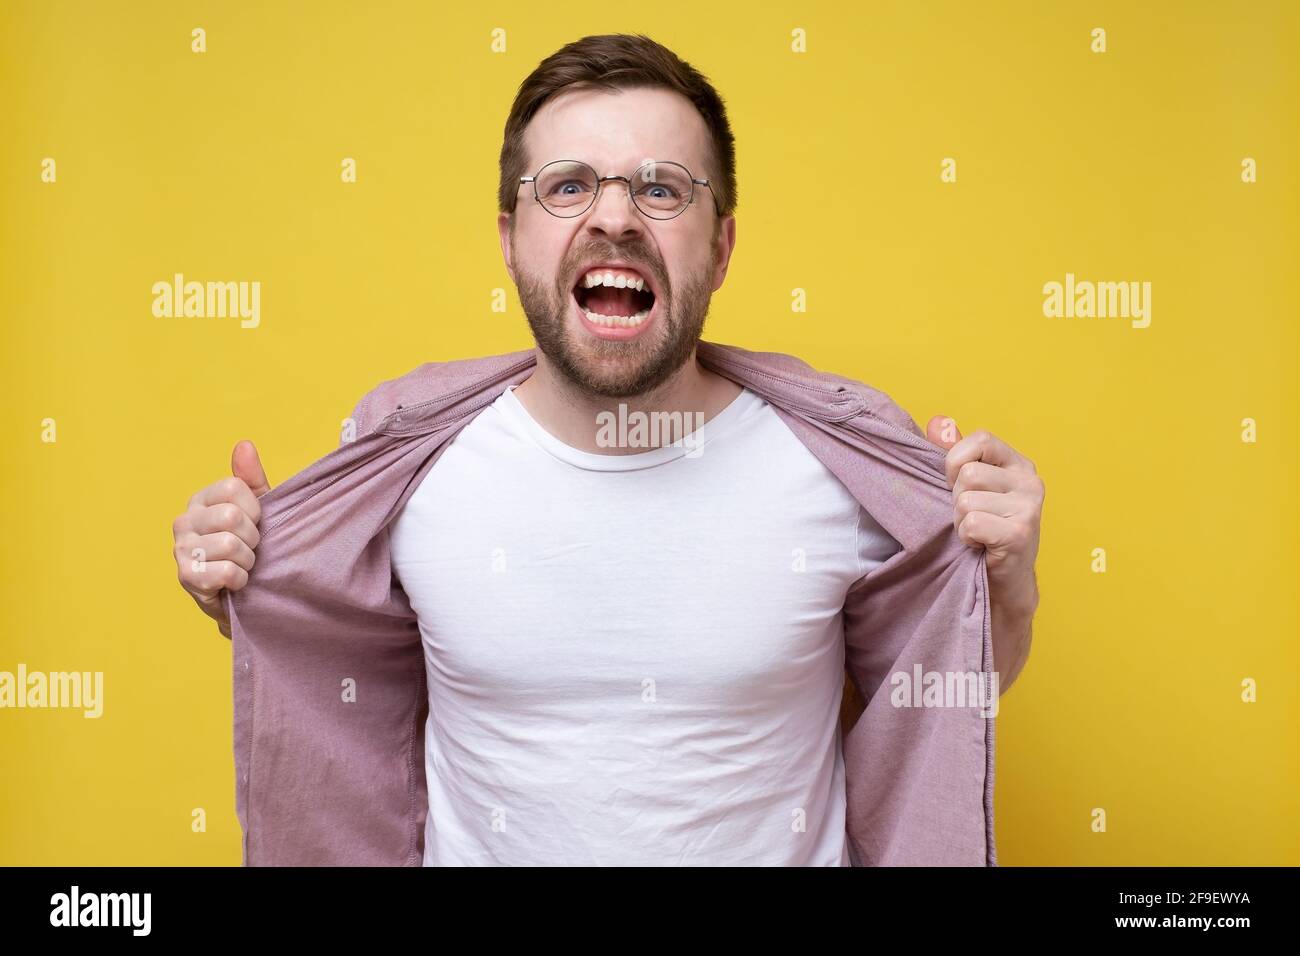 Angry, annoyed man looks furiously and bares teeth, grabbing his shirt with hands. Stress. Psychological concept.  Stock Photo